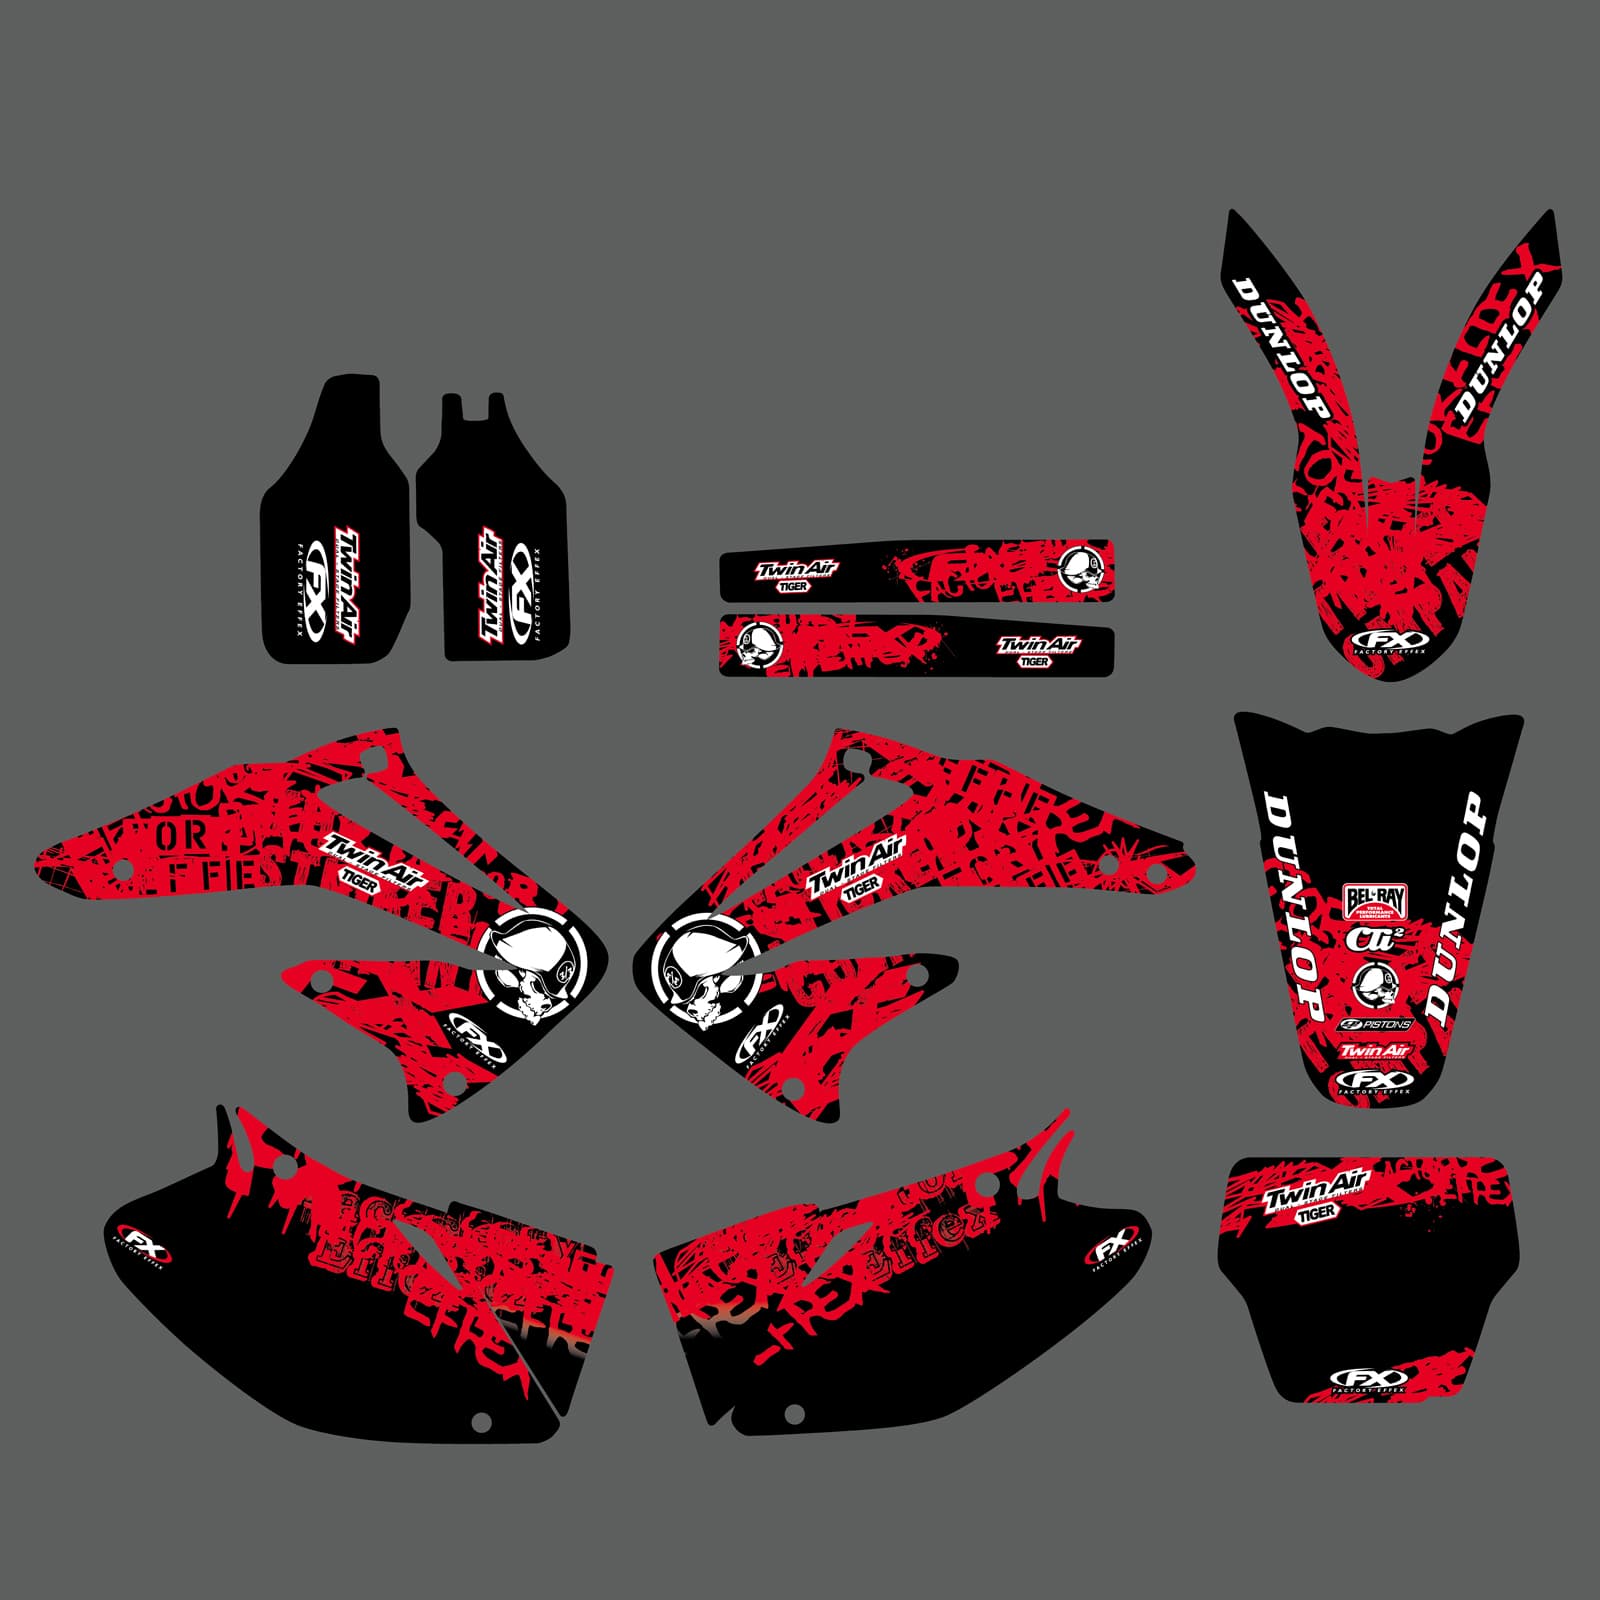 Team Graphics Backgrounds Decals Stickers For HONDA CRF450 2002-2004